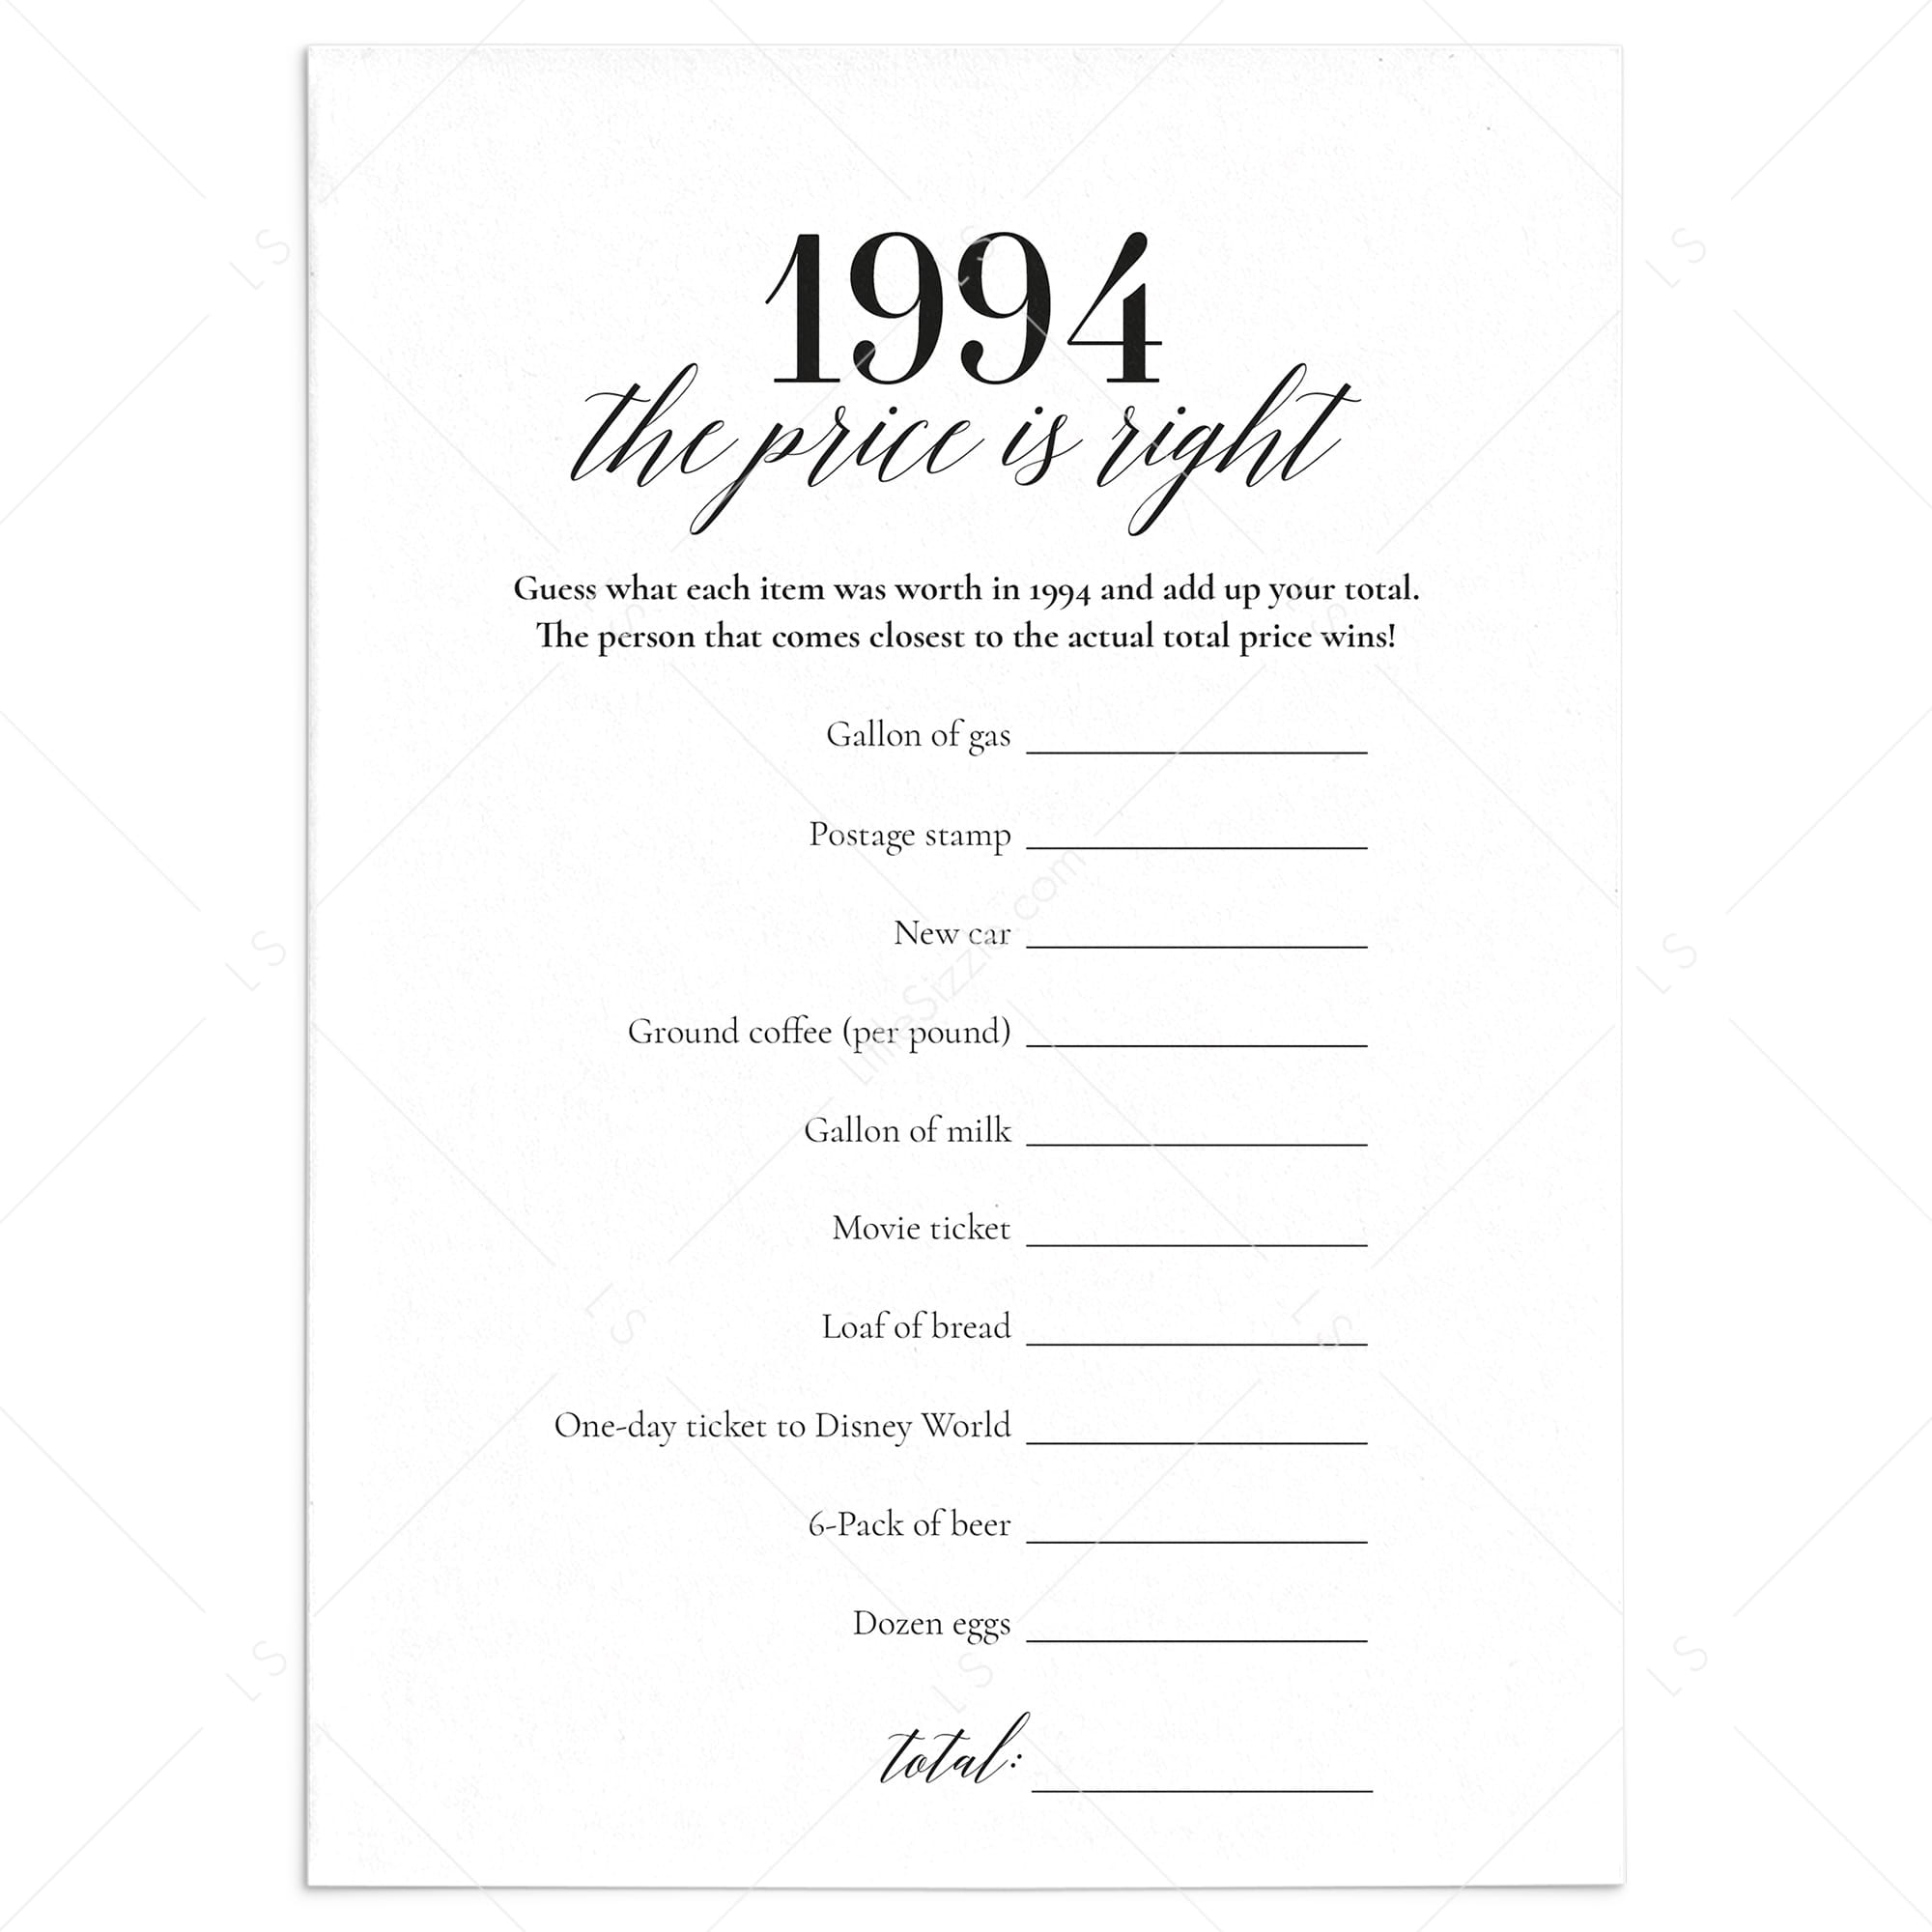 1994 The Price Is Right Game with Answers Printable by LittleSizzle